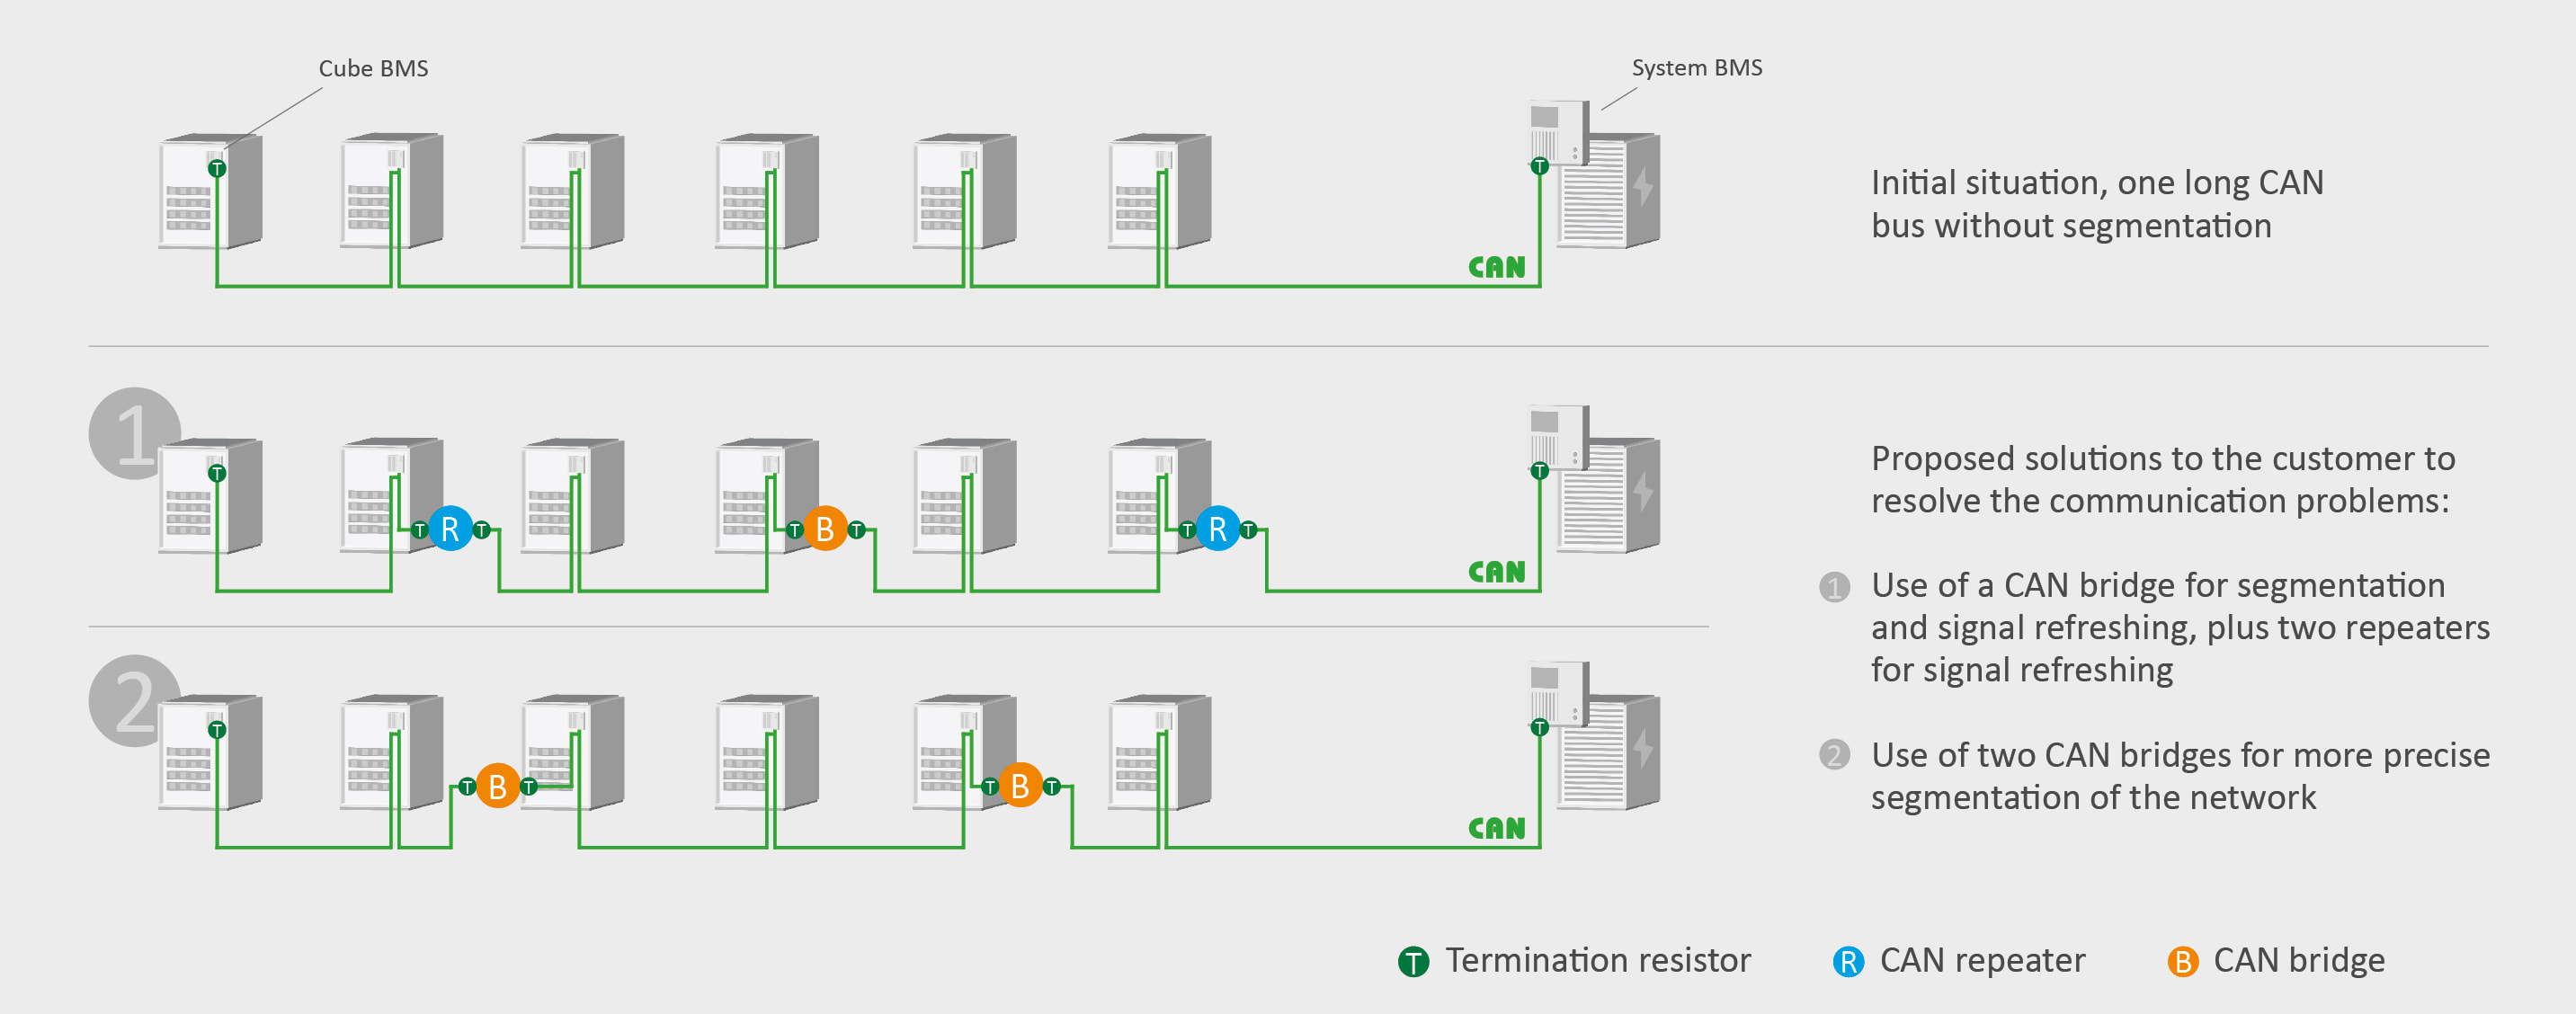 Networking of BESS components with CAN repeaters and bridges